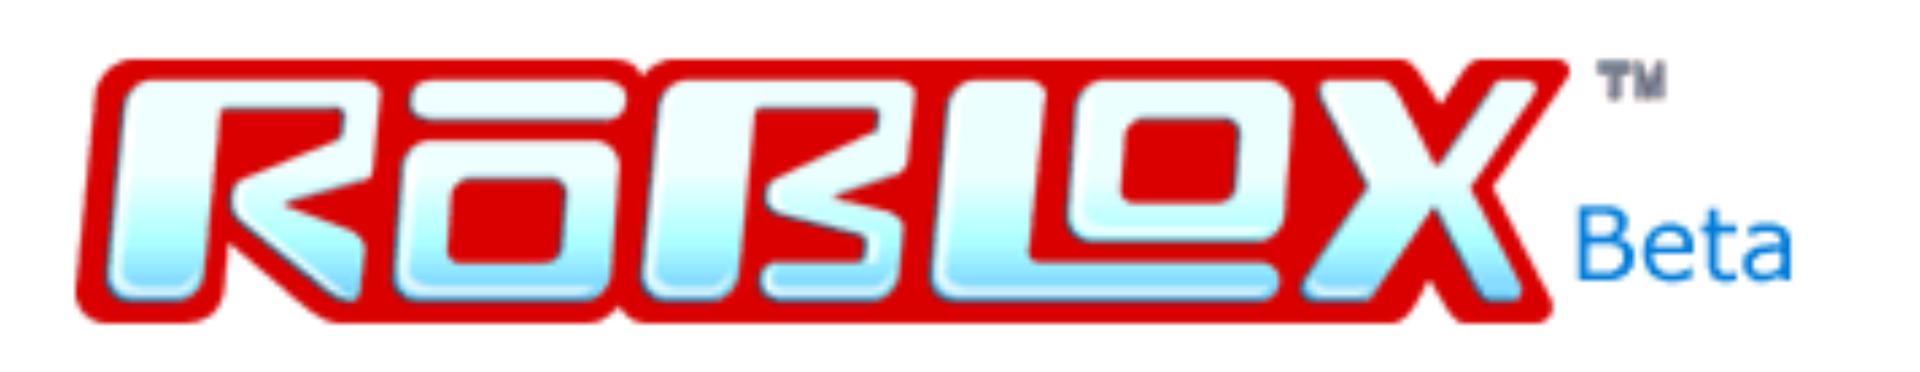 A Complete History Of The Roblox Logo Pocket Tactics - roblox logo evolution 2004 to 2020